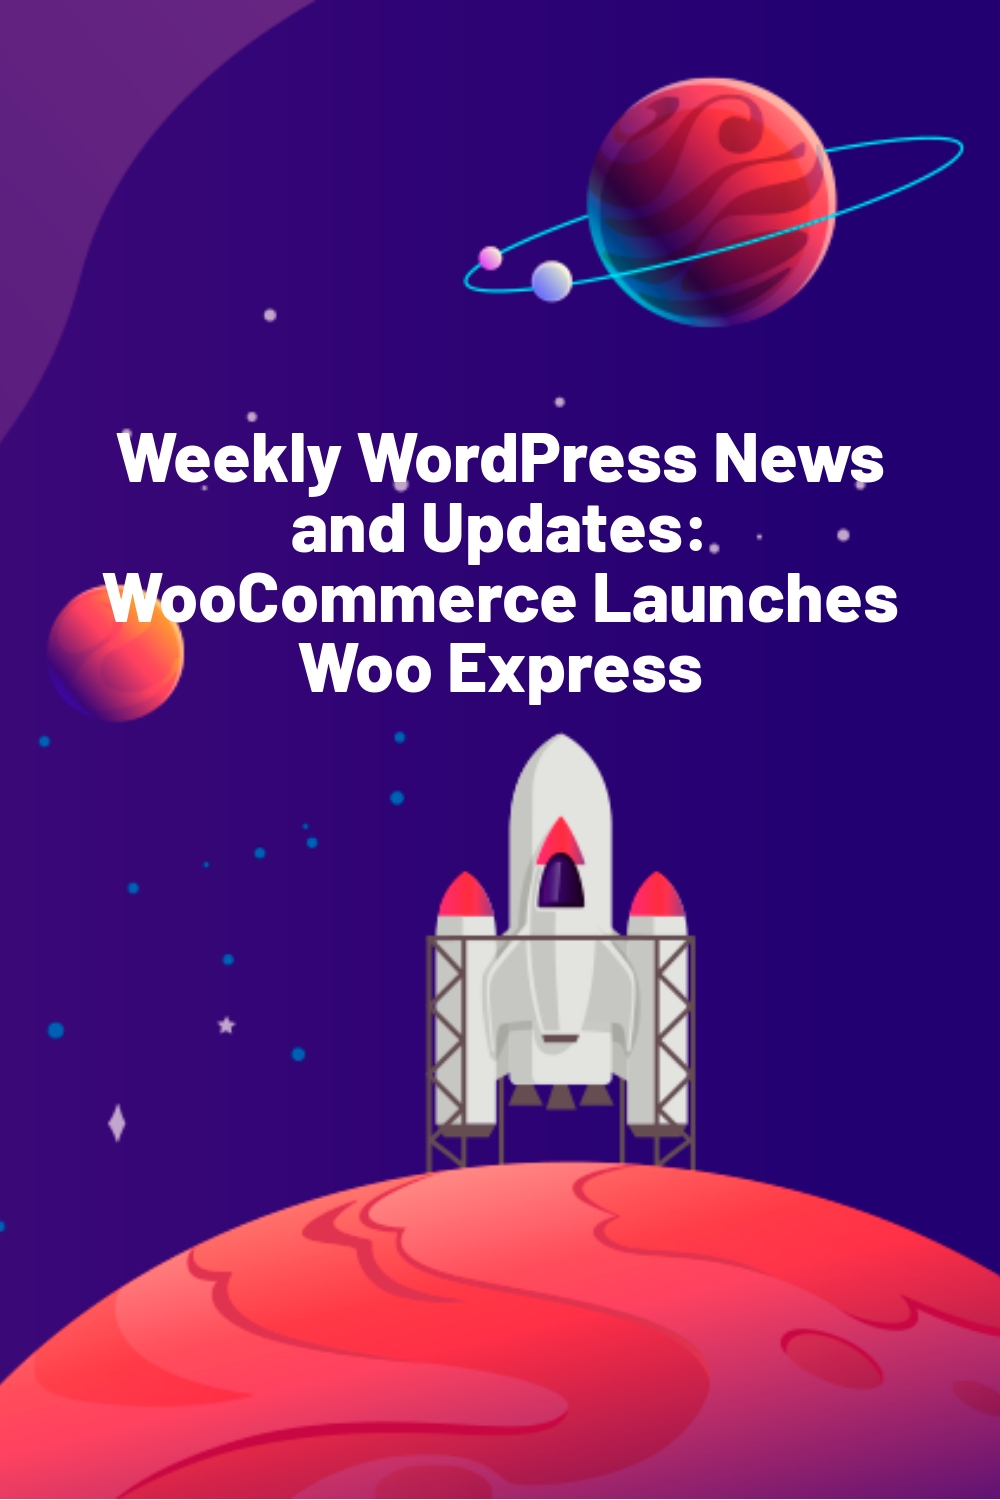 Weekly WordPress News and Updates: WooCommerce Launches Woo Express